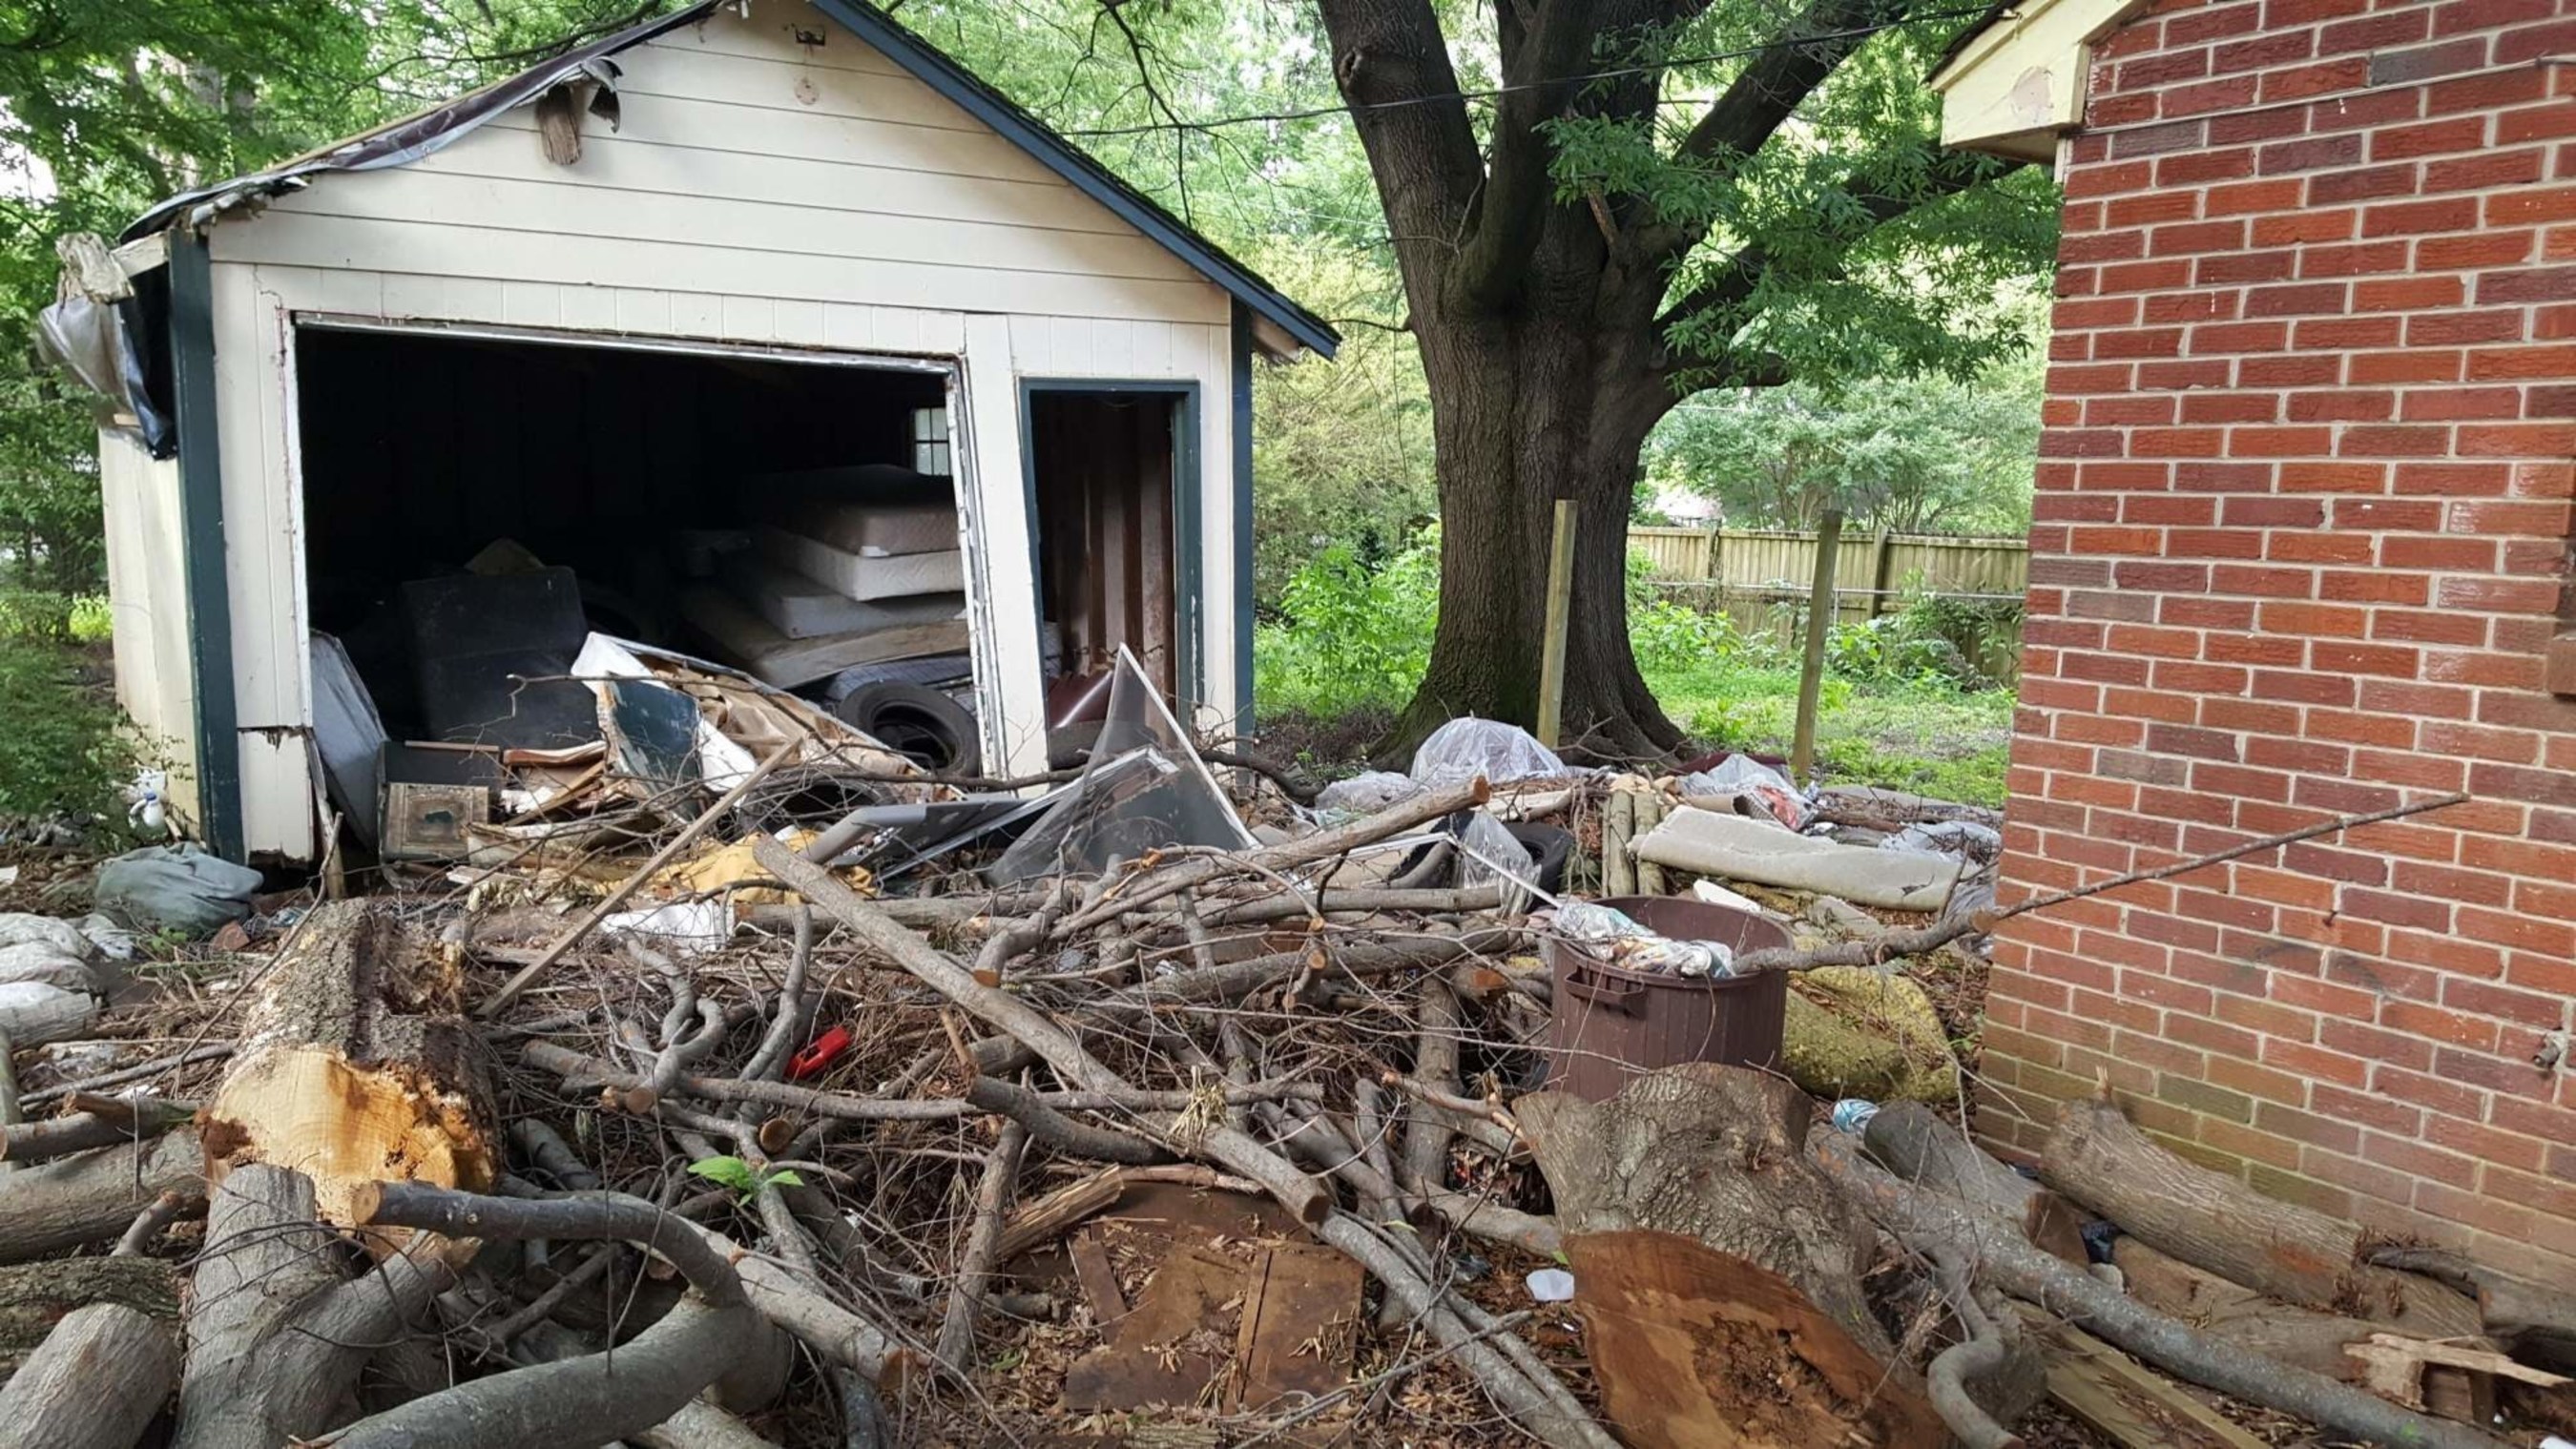 This photo was taken in April 2016 and shows a foreclosure in an African American neighborhood in Memphis, TN, with significant debris left in the yard by Bank of America.  This property is a health and safety hazard for people living nearby.